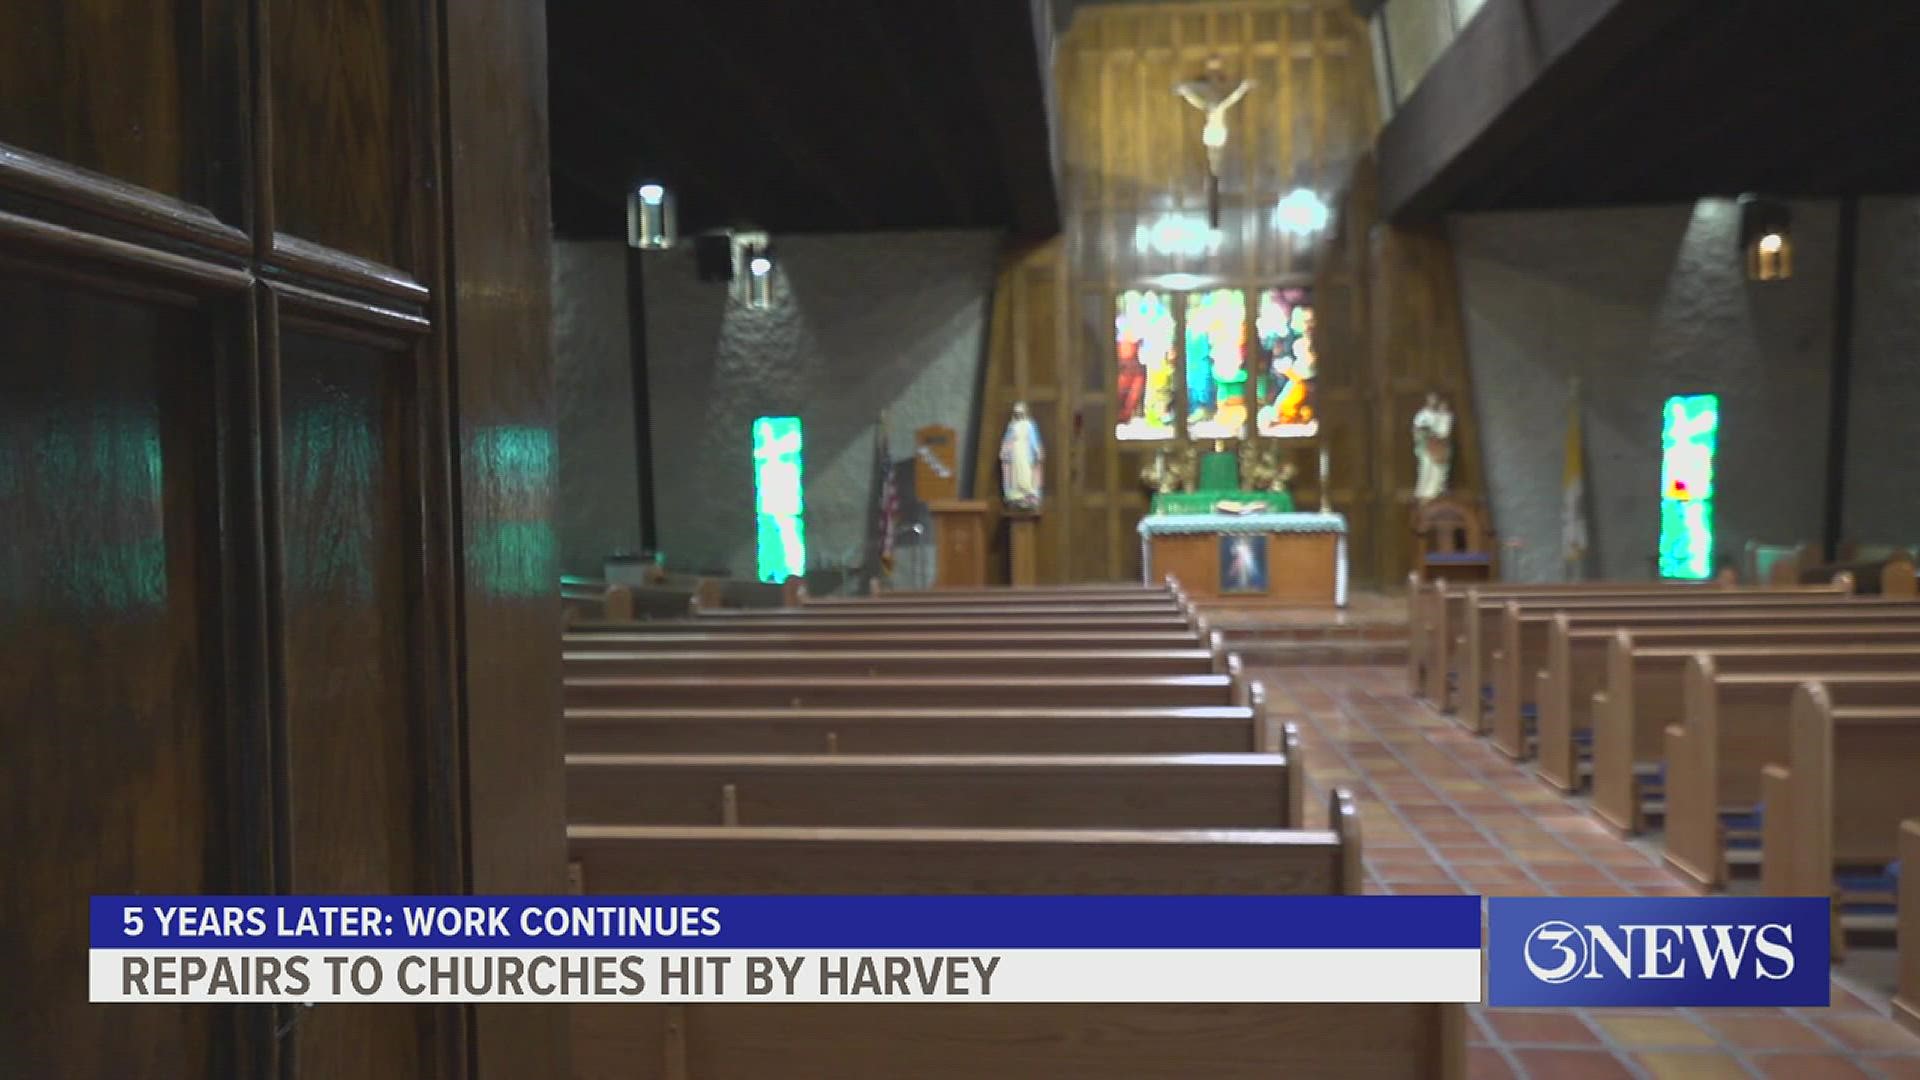 Even though it’s been 5 years, parishes and buildings within the Diocese of Corpus Christi continue to undergo work.